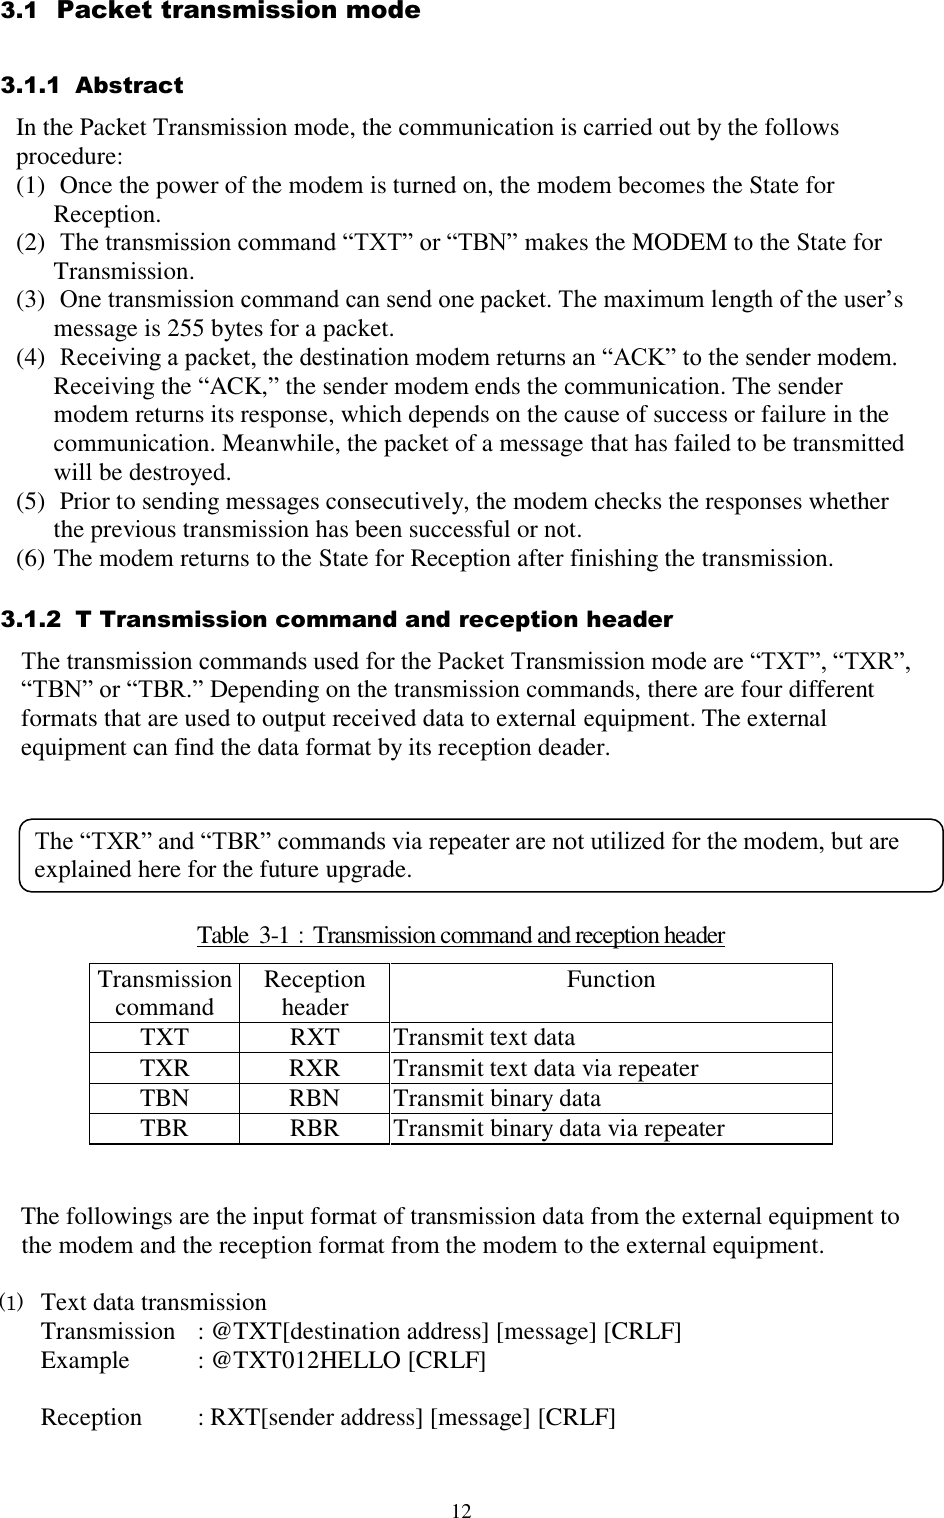  12 3.1  Packet transmission mode 3.1.1  Abstract In the Packet Transmission mode, the communication is carried out by the follows procedure:  (1)  Once the power of the modem is turned on, the modem becomes the State for Reception. (2)  The transmission command “TXT” or “TBN” makes the MODEM to the State for Transmission. (3)  One transmission command can send one packet. The maximum length of the user’s message is 255 bytes for a packet. (4)  Receiving a packet, the destination modem returns an “ACK” to the sender modem. Receiving the “ACK,” the sender modem ends the communication. The sender modem returns its response, which depends on the cause of success or failure in the communication. Meanwhile, the packet of a message that has failed to be transmitted will be destroyed.  (5)  Prior to sending messages consecutively, the modem checks the responses whether the previous transmission has been successful or not. (6) The modem returns to the State for Reception after finishing the transmission. 3.1.2  T Transmission command and reception header  The transmission commands used for the Packet Transmission mode are “TXT”, “TXR”, “TBN” or “TBR.” Depending on the transmission commands, there are four different formats that are used to output received data to external equipment. The external equipment can find the data format by its reception deader.       Table  3-1：Transmission command and reception header Transmission command  Reception  header Function  TXT RXT Transmit text data TXR RXR Transmit text data via repeater TBN RBN Transmit binary data TBR RBR Transmit binary data via repeater   The followings are the input format of transmission data from the external equipment to the modem and the reception format from the modem to the external equipment.   (1) Text data transmission Transmission  : @TXT[destination address] [message] [CRLF] Example  : @TXT012HELLO [CRLF]  Reception   : RXT[sender address] [message] [CRLF] The “TXR” and “TBR” commands via repeater are not utilized for the modem, but are explained here for the future upgrade. 